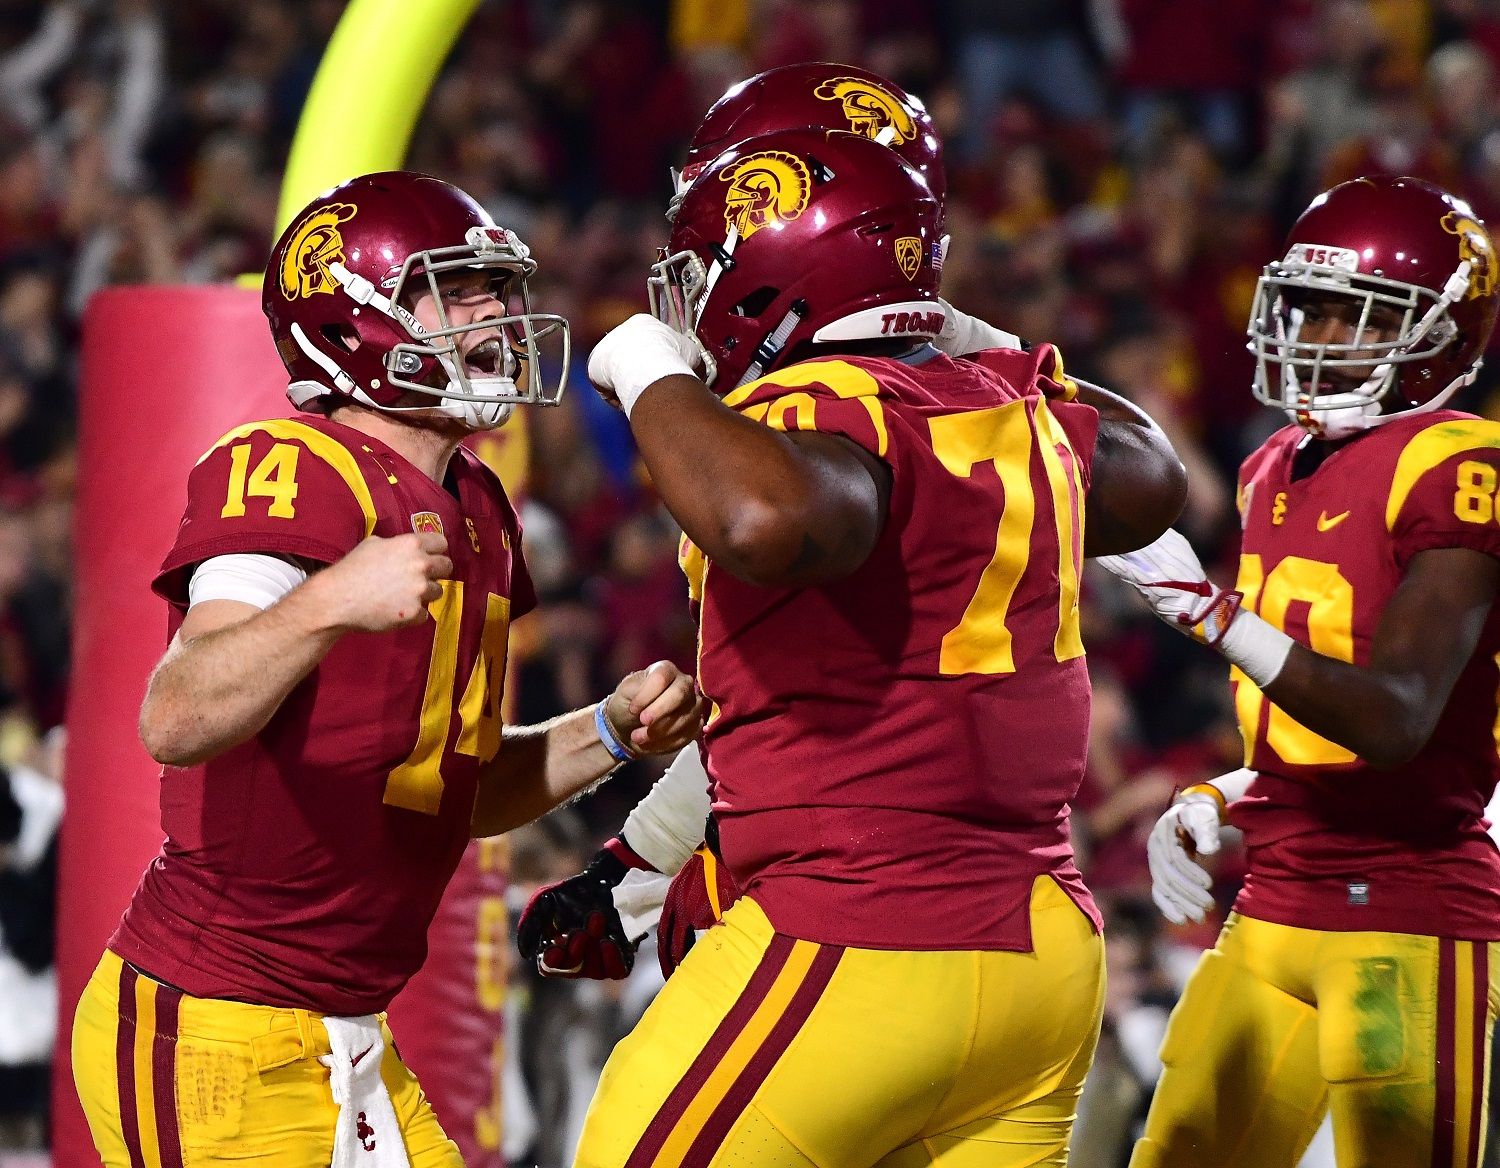 LOS ANGELES, CA - NOVEMBER 18:  Sam Darnold #14 of the USC Trojans reacts to his touchdown to take a 21-7 lead over the UCLA Bruins during the third quarter at Los Angeles Memorial Coliseum on November 18, 2017 in Los Angeles, California.  (Photo by Harry How/Getty Images)